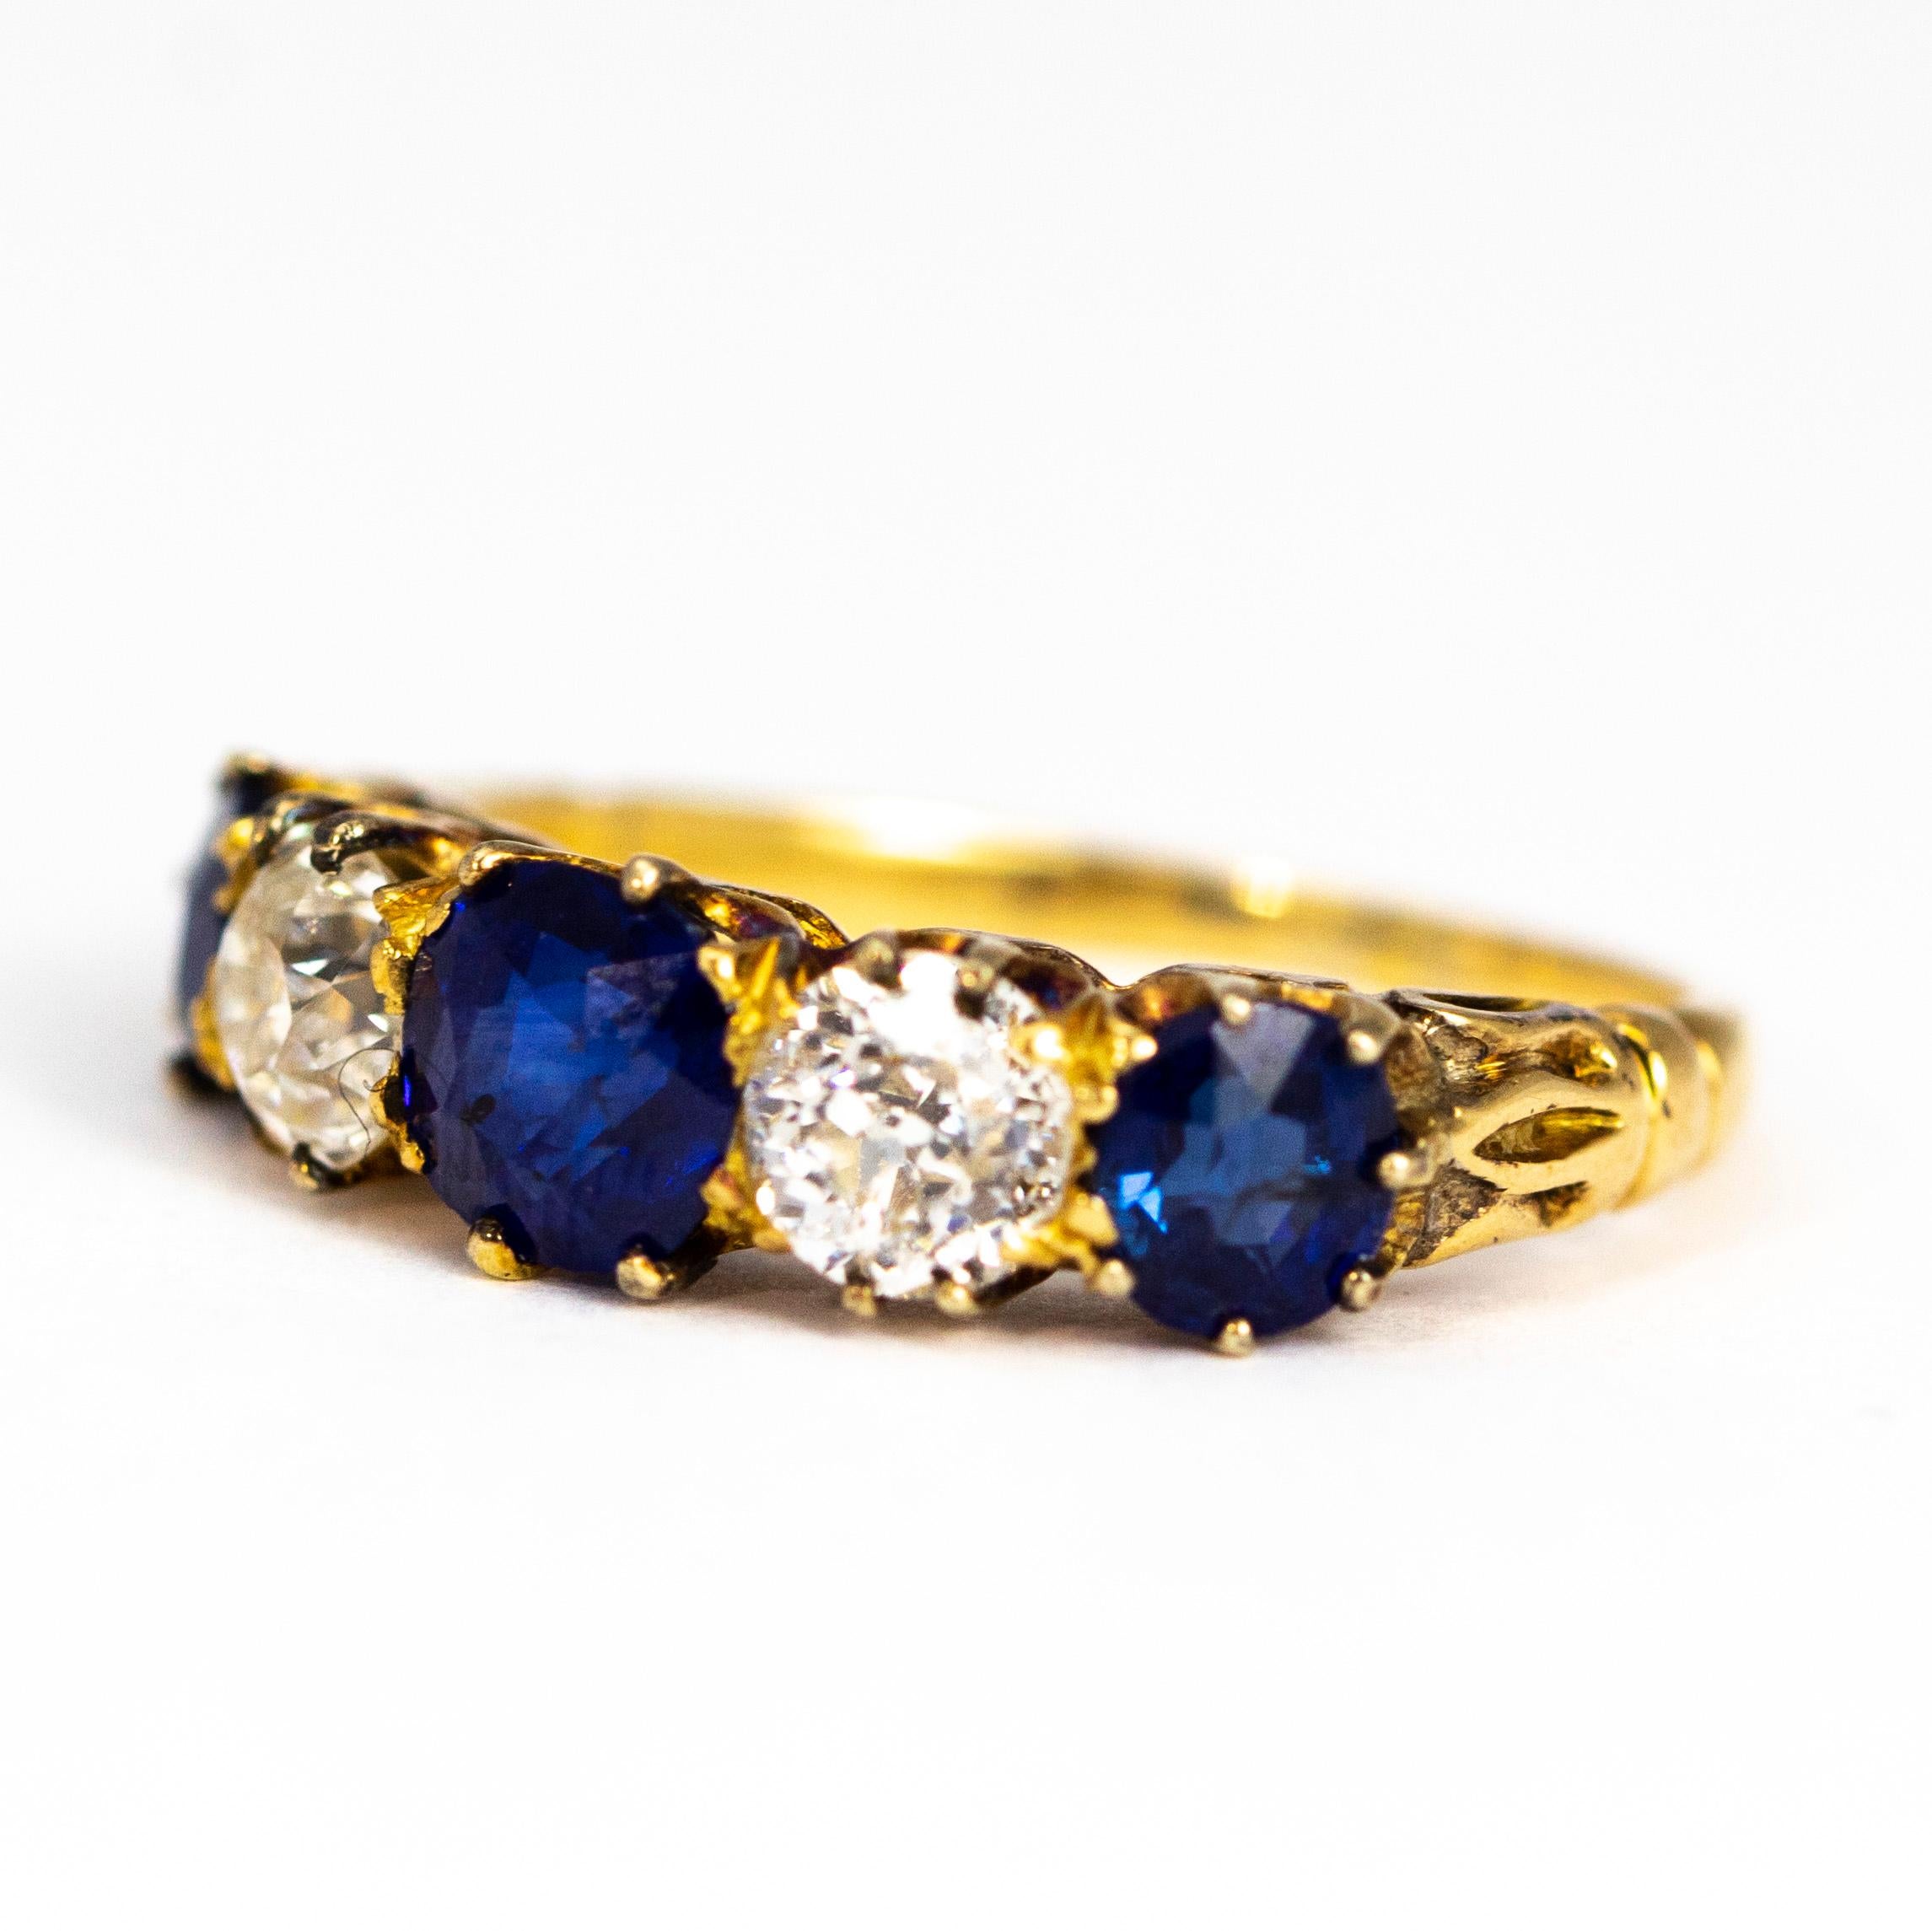 The sapphires in this ring are a deep and gorgeous blue colour. The central stone measures 60pts and the outer measure approximately 40pts each. The old mine cut diamonds which sit in between are a G/H colour VSI. The stones are all modelled in 18ct